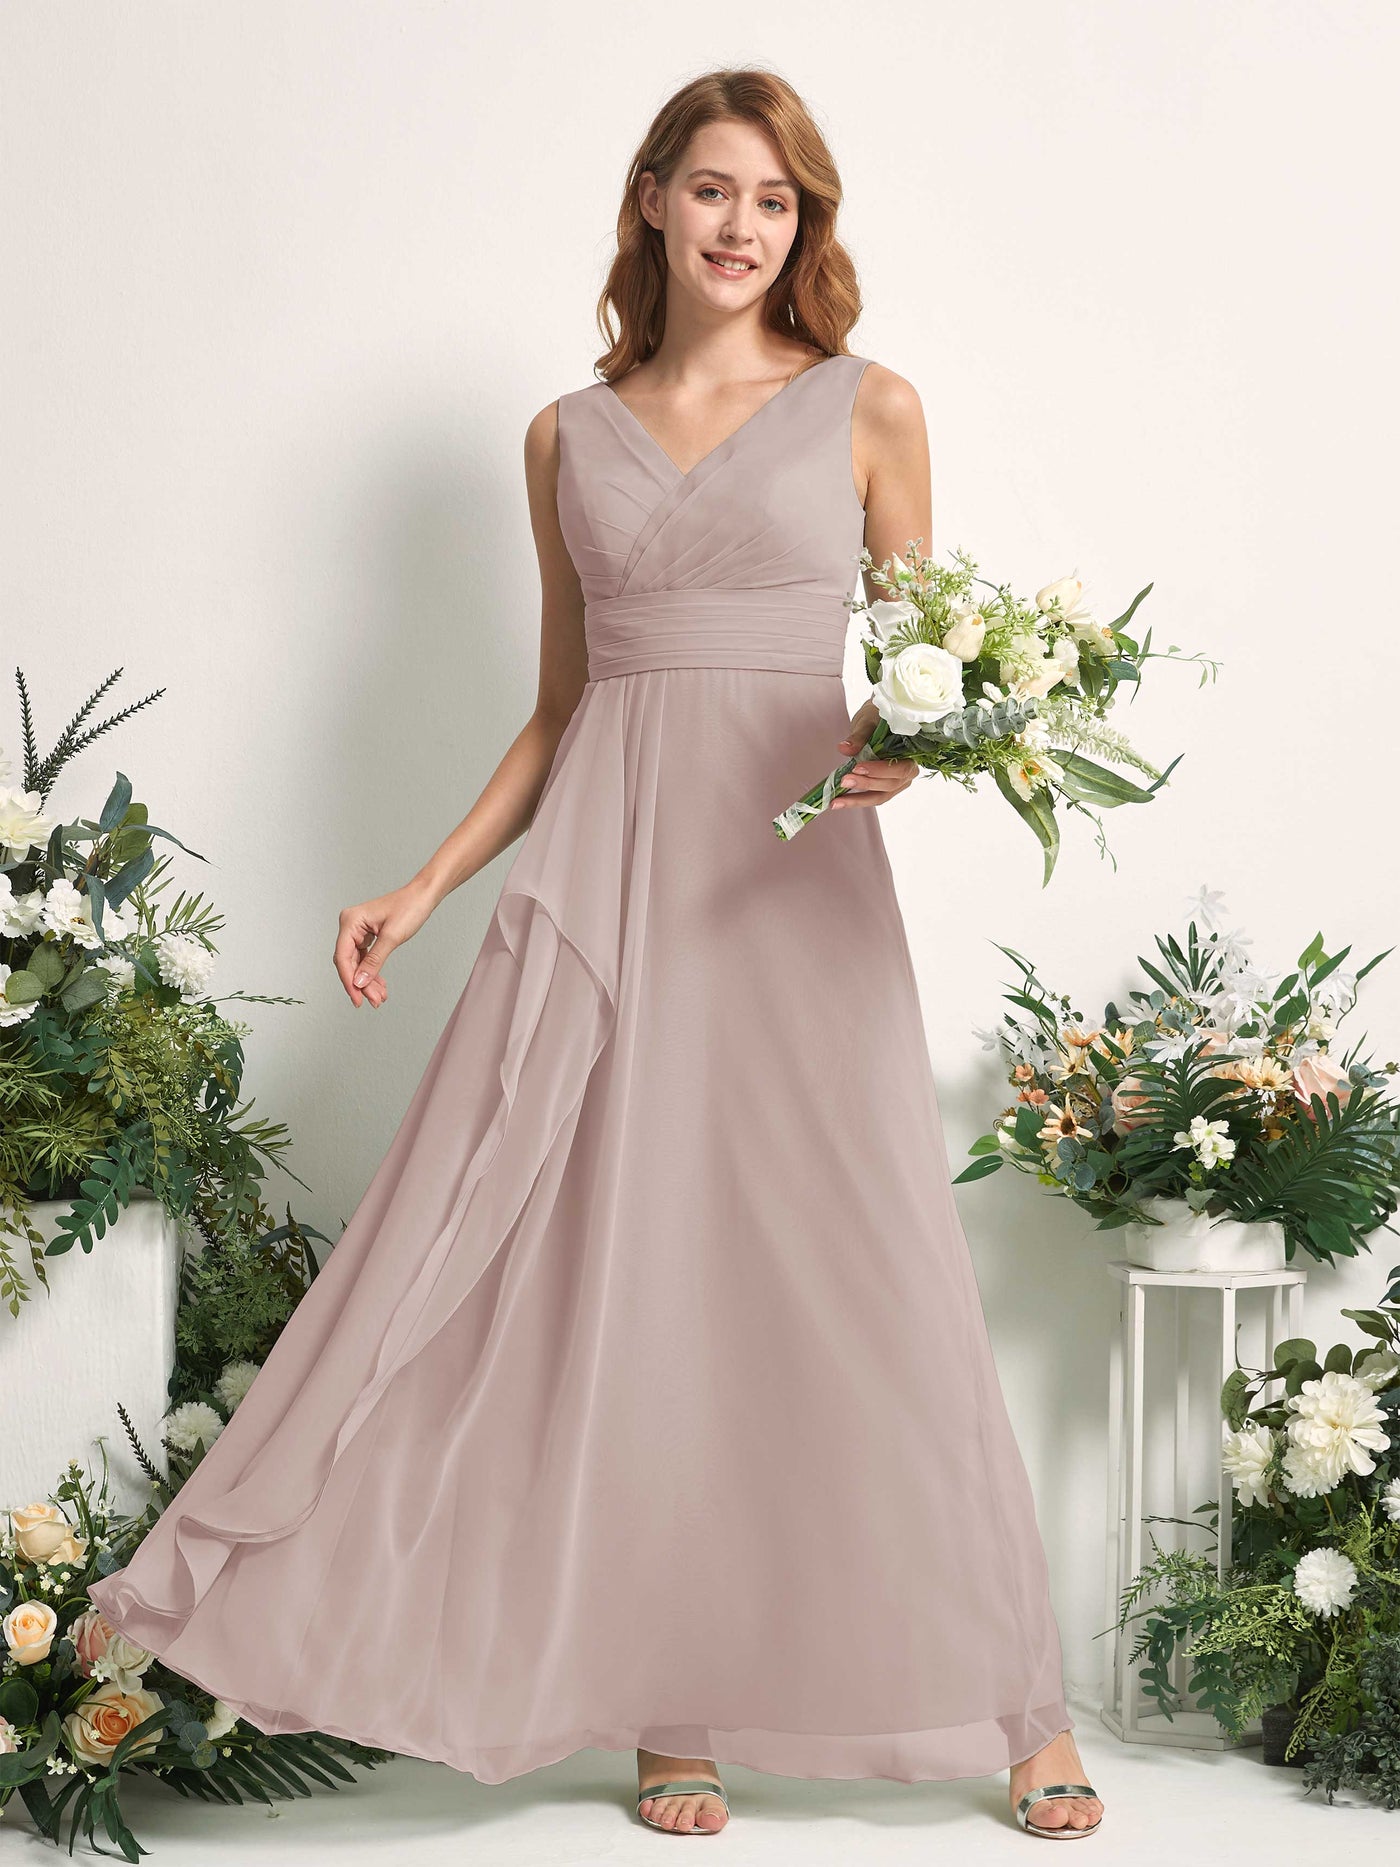 Bridesmaid Dress A-line Chiffon V-neck Full Length Sleeveless Wedding Party Dress - Taupe (81227124)#color_taupe